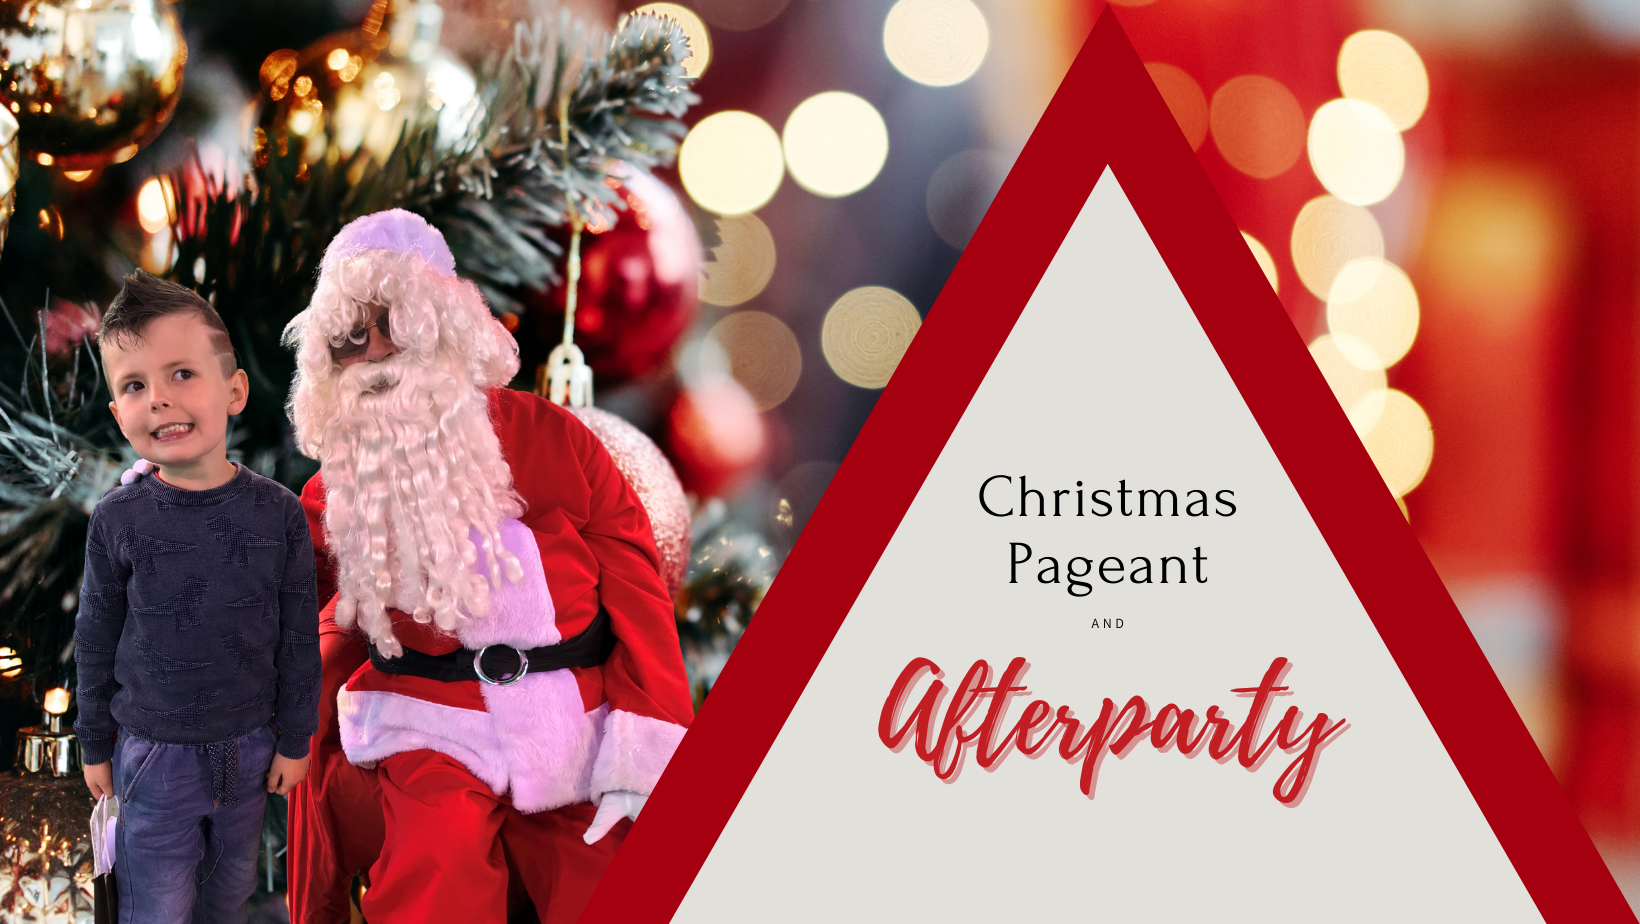 Christmas pageant and after party banner with child standing next to santa